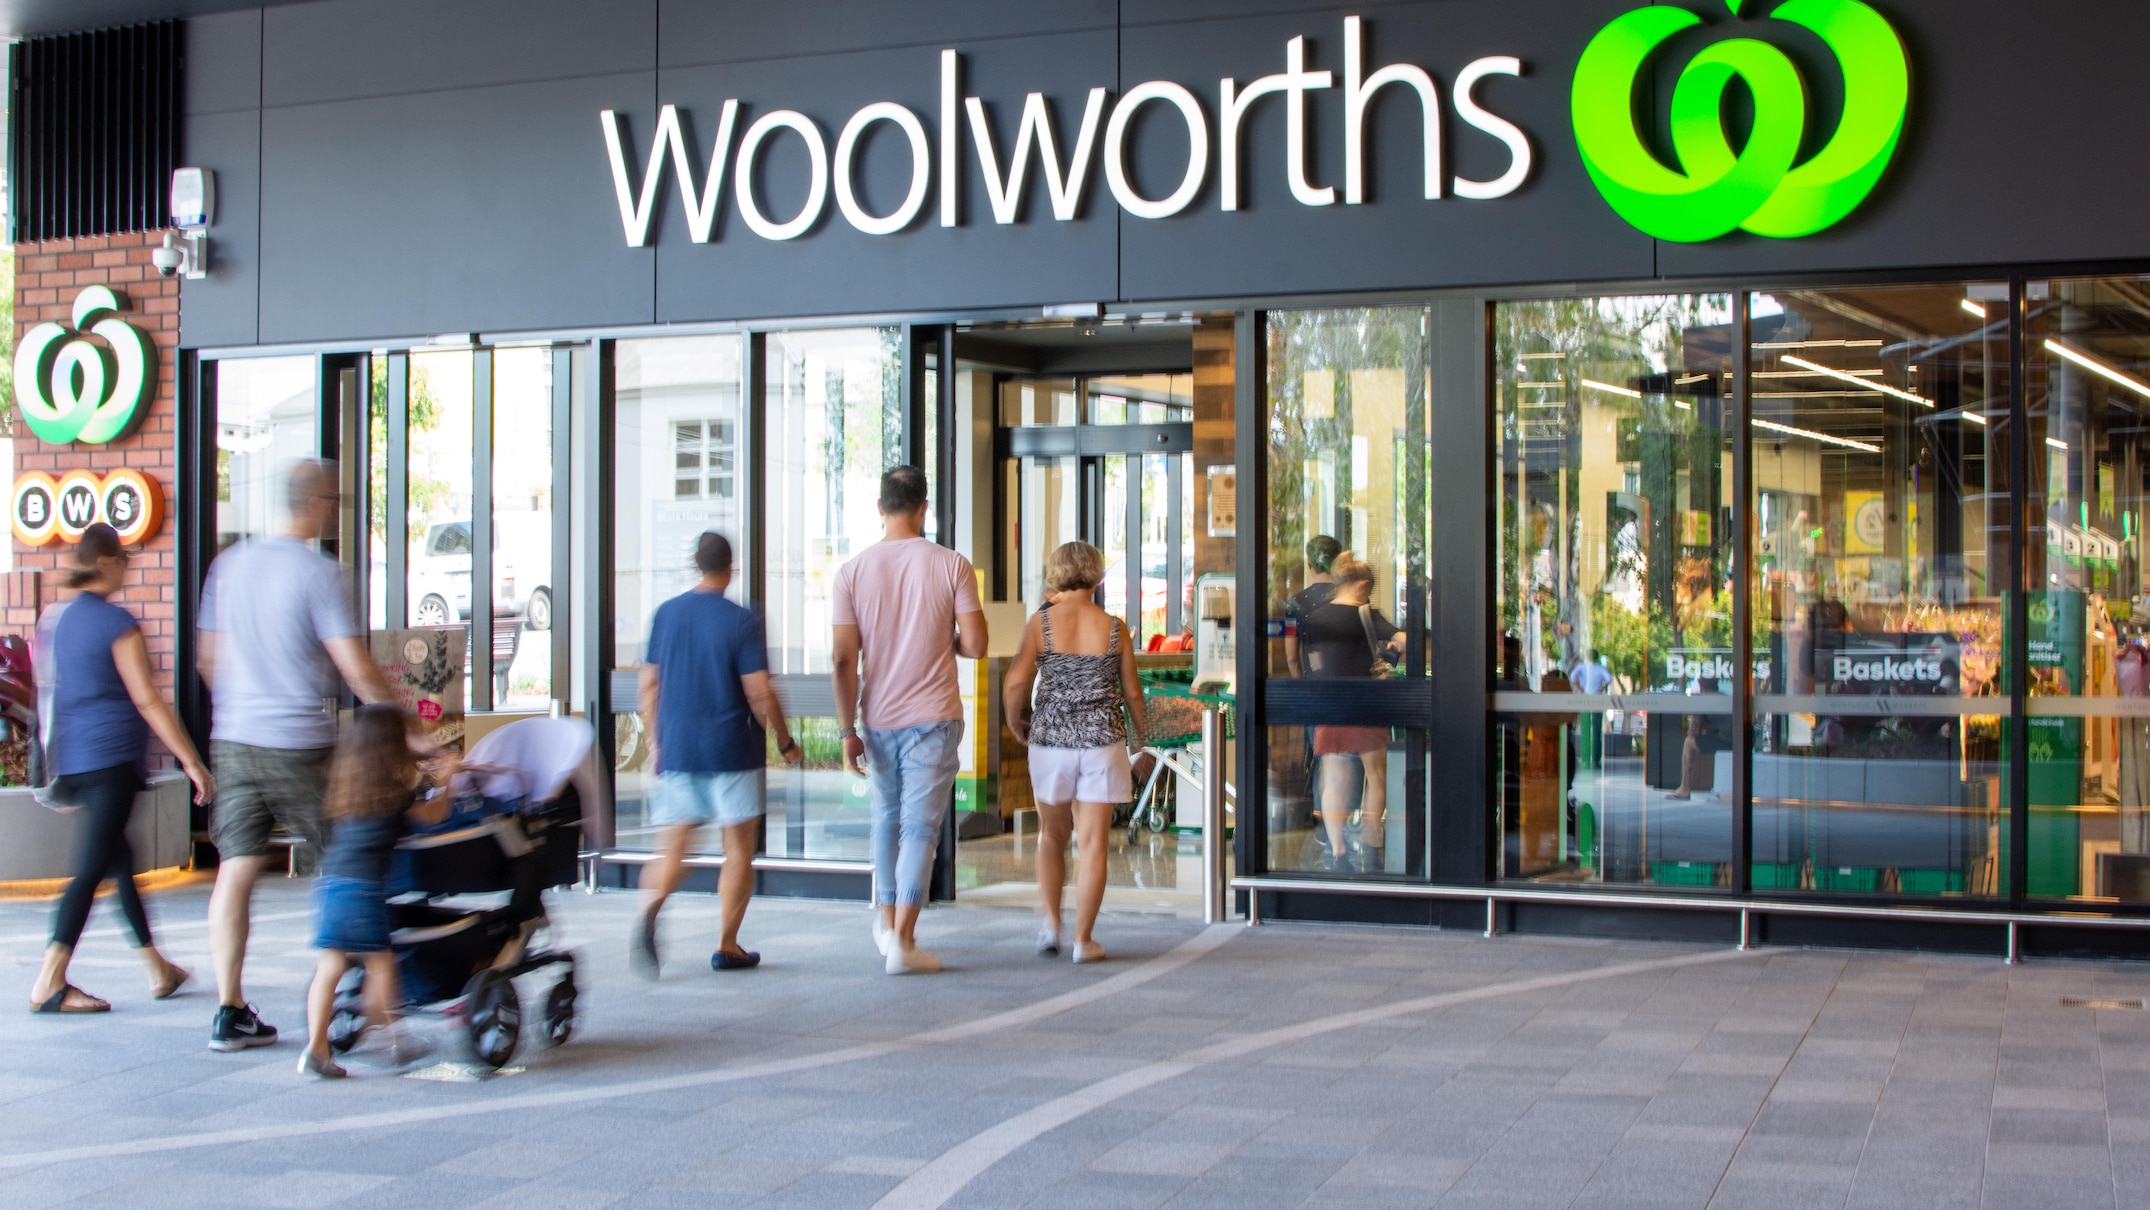 woolworths admits to underpaying staff by $1.24m, could face a hefty fine